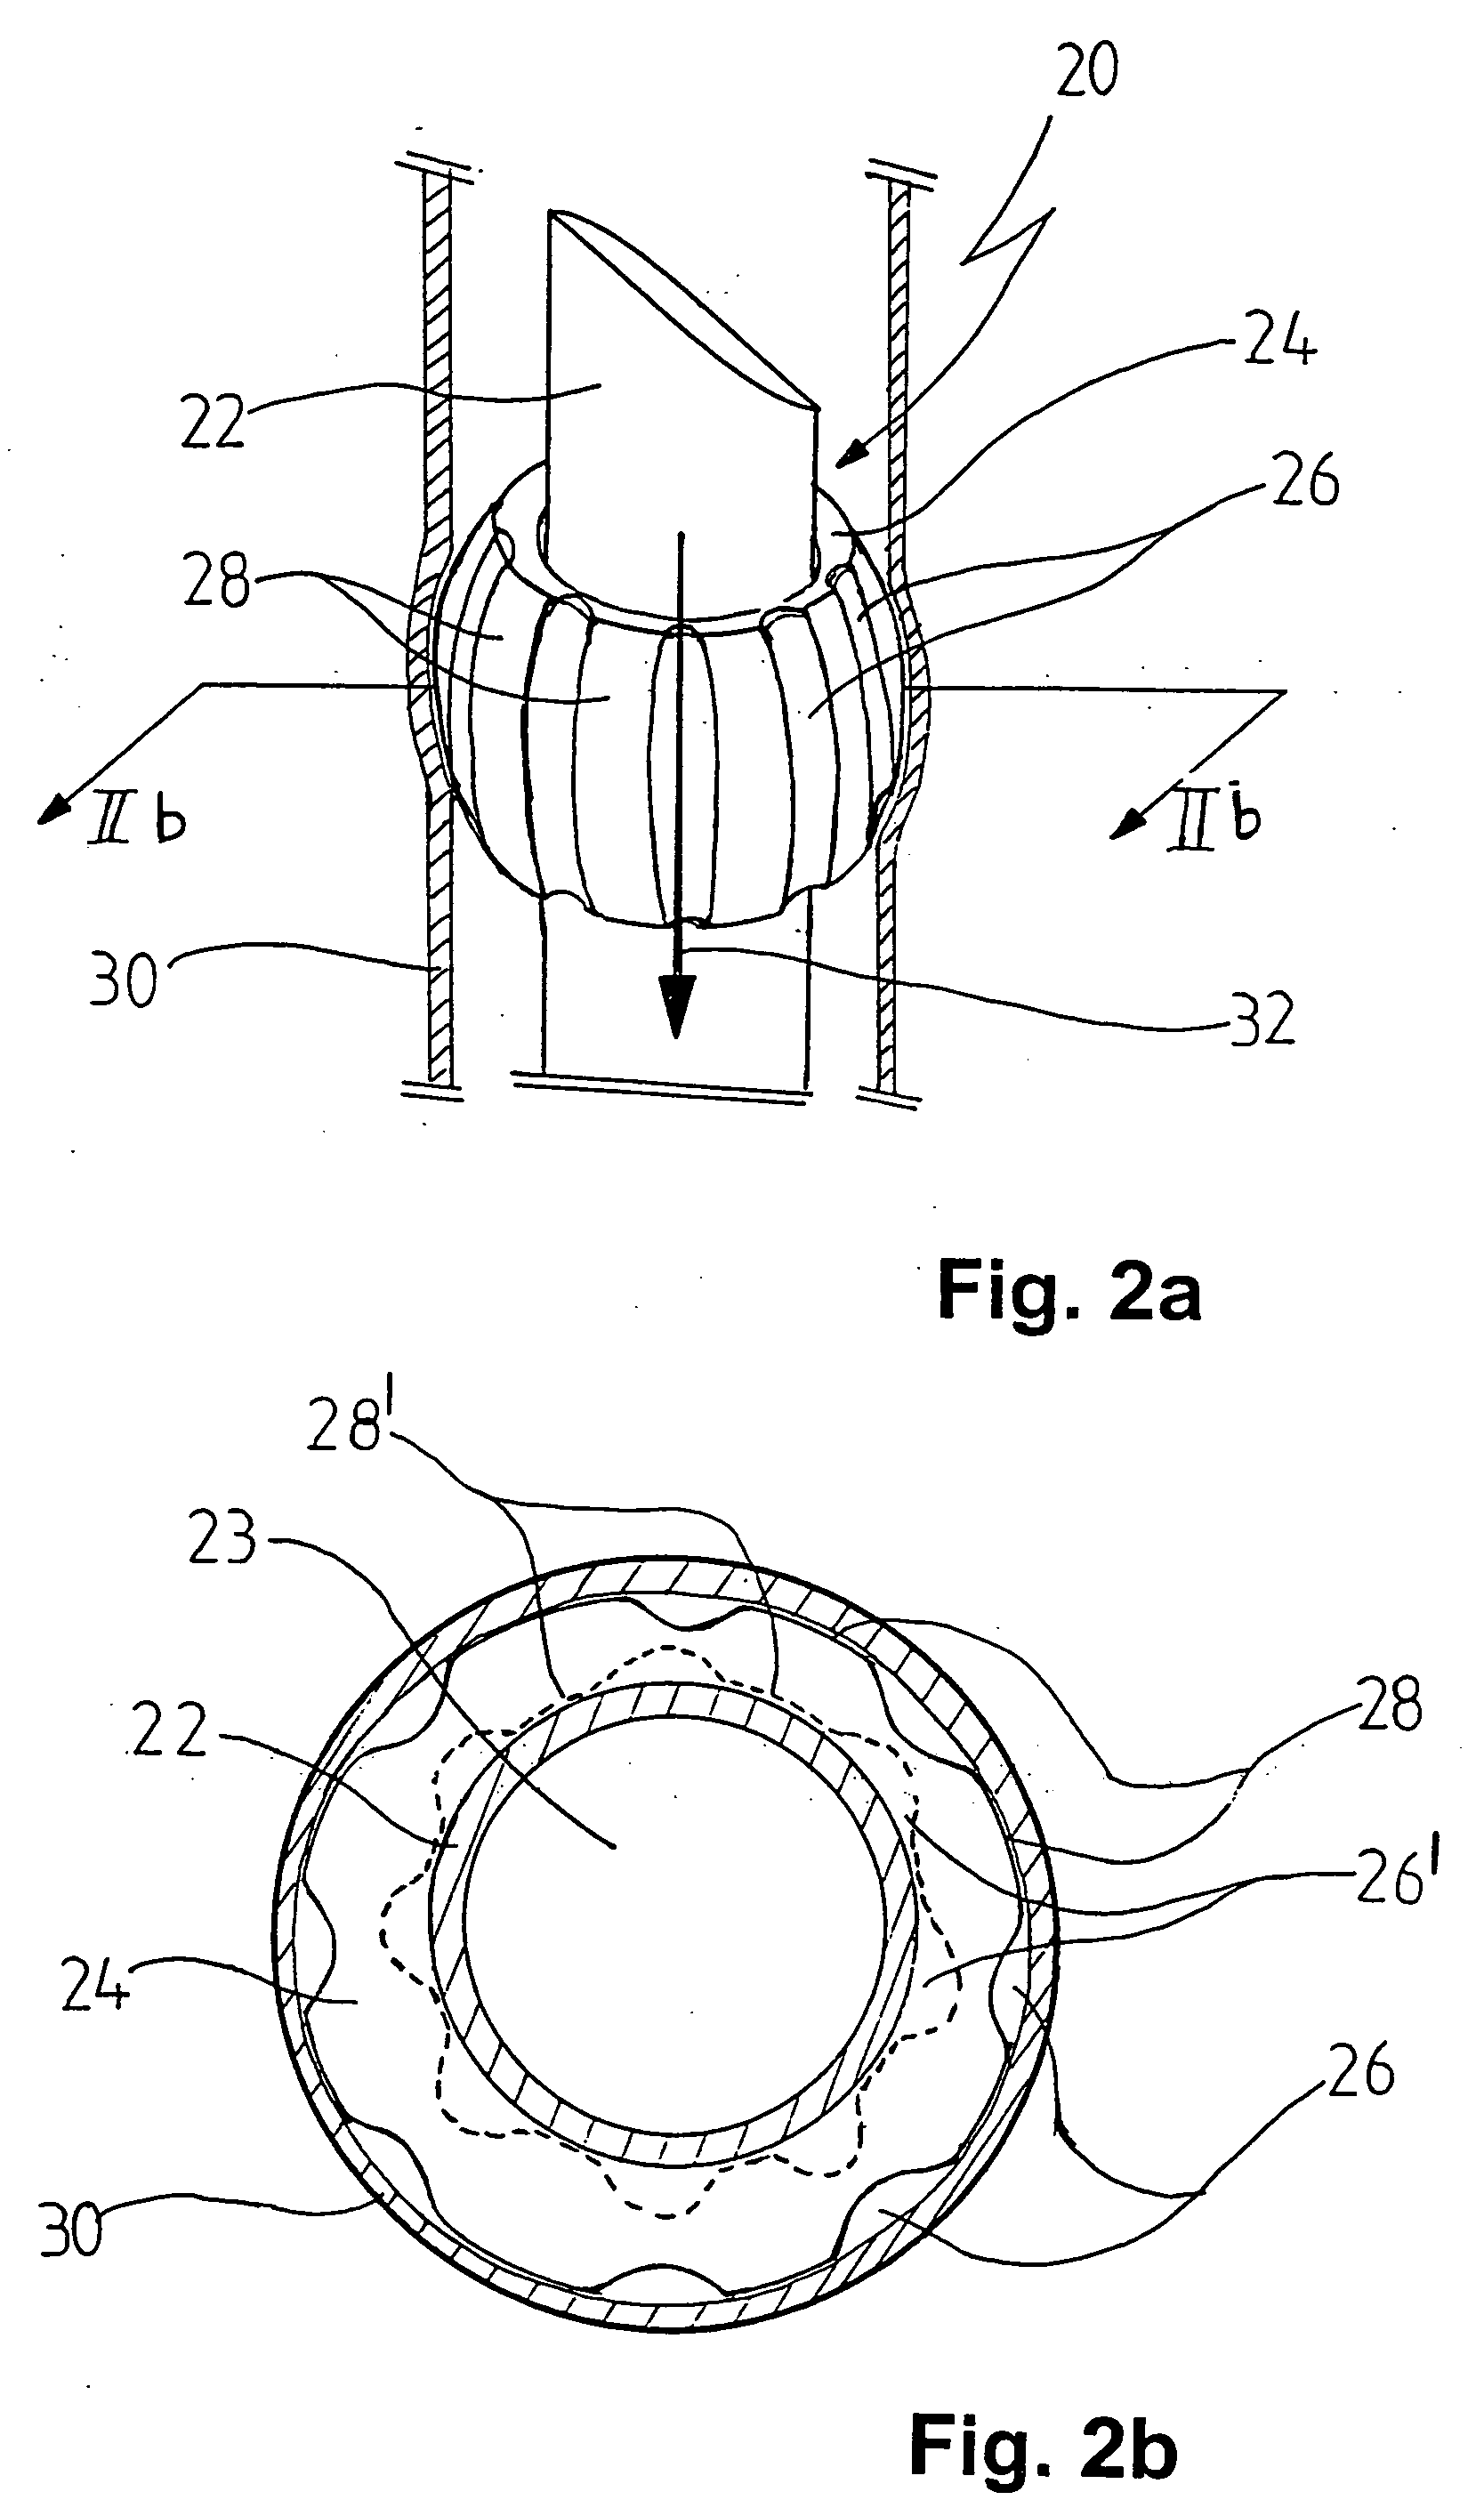 Appliance for cannulation of a blood vessel